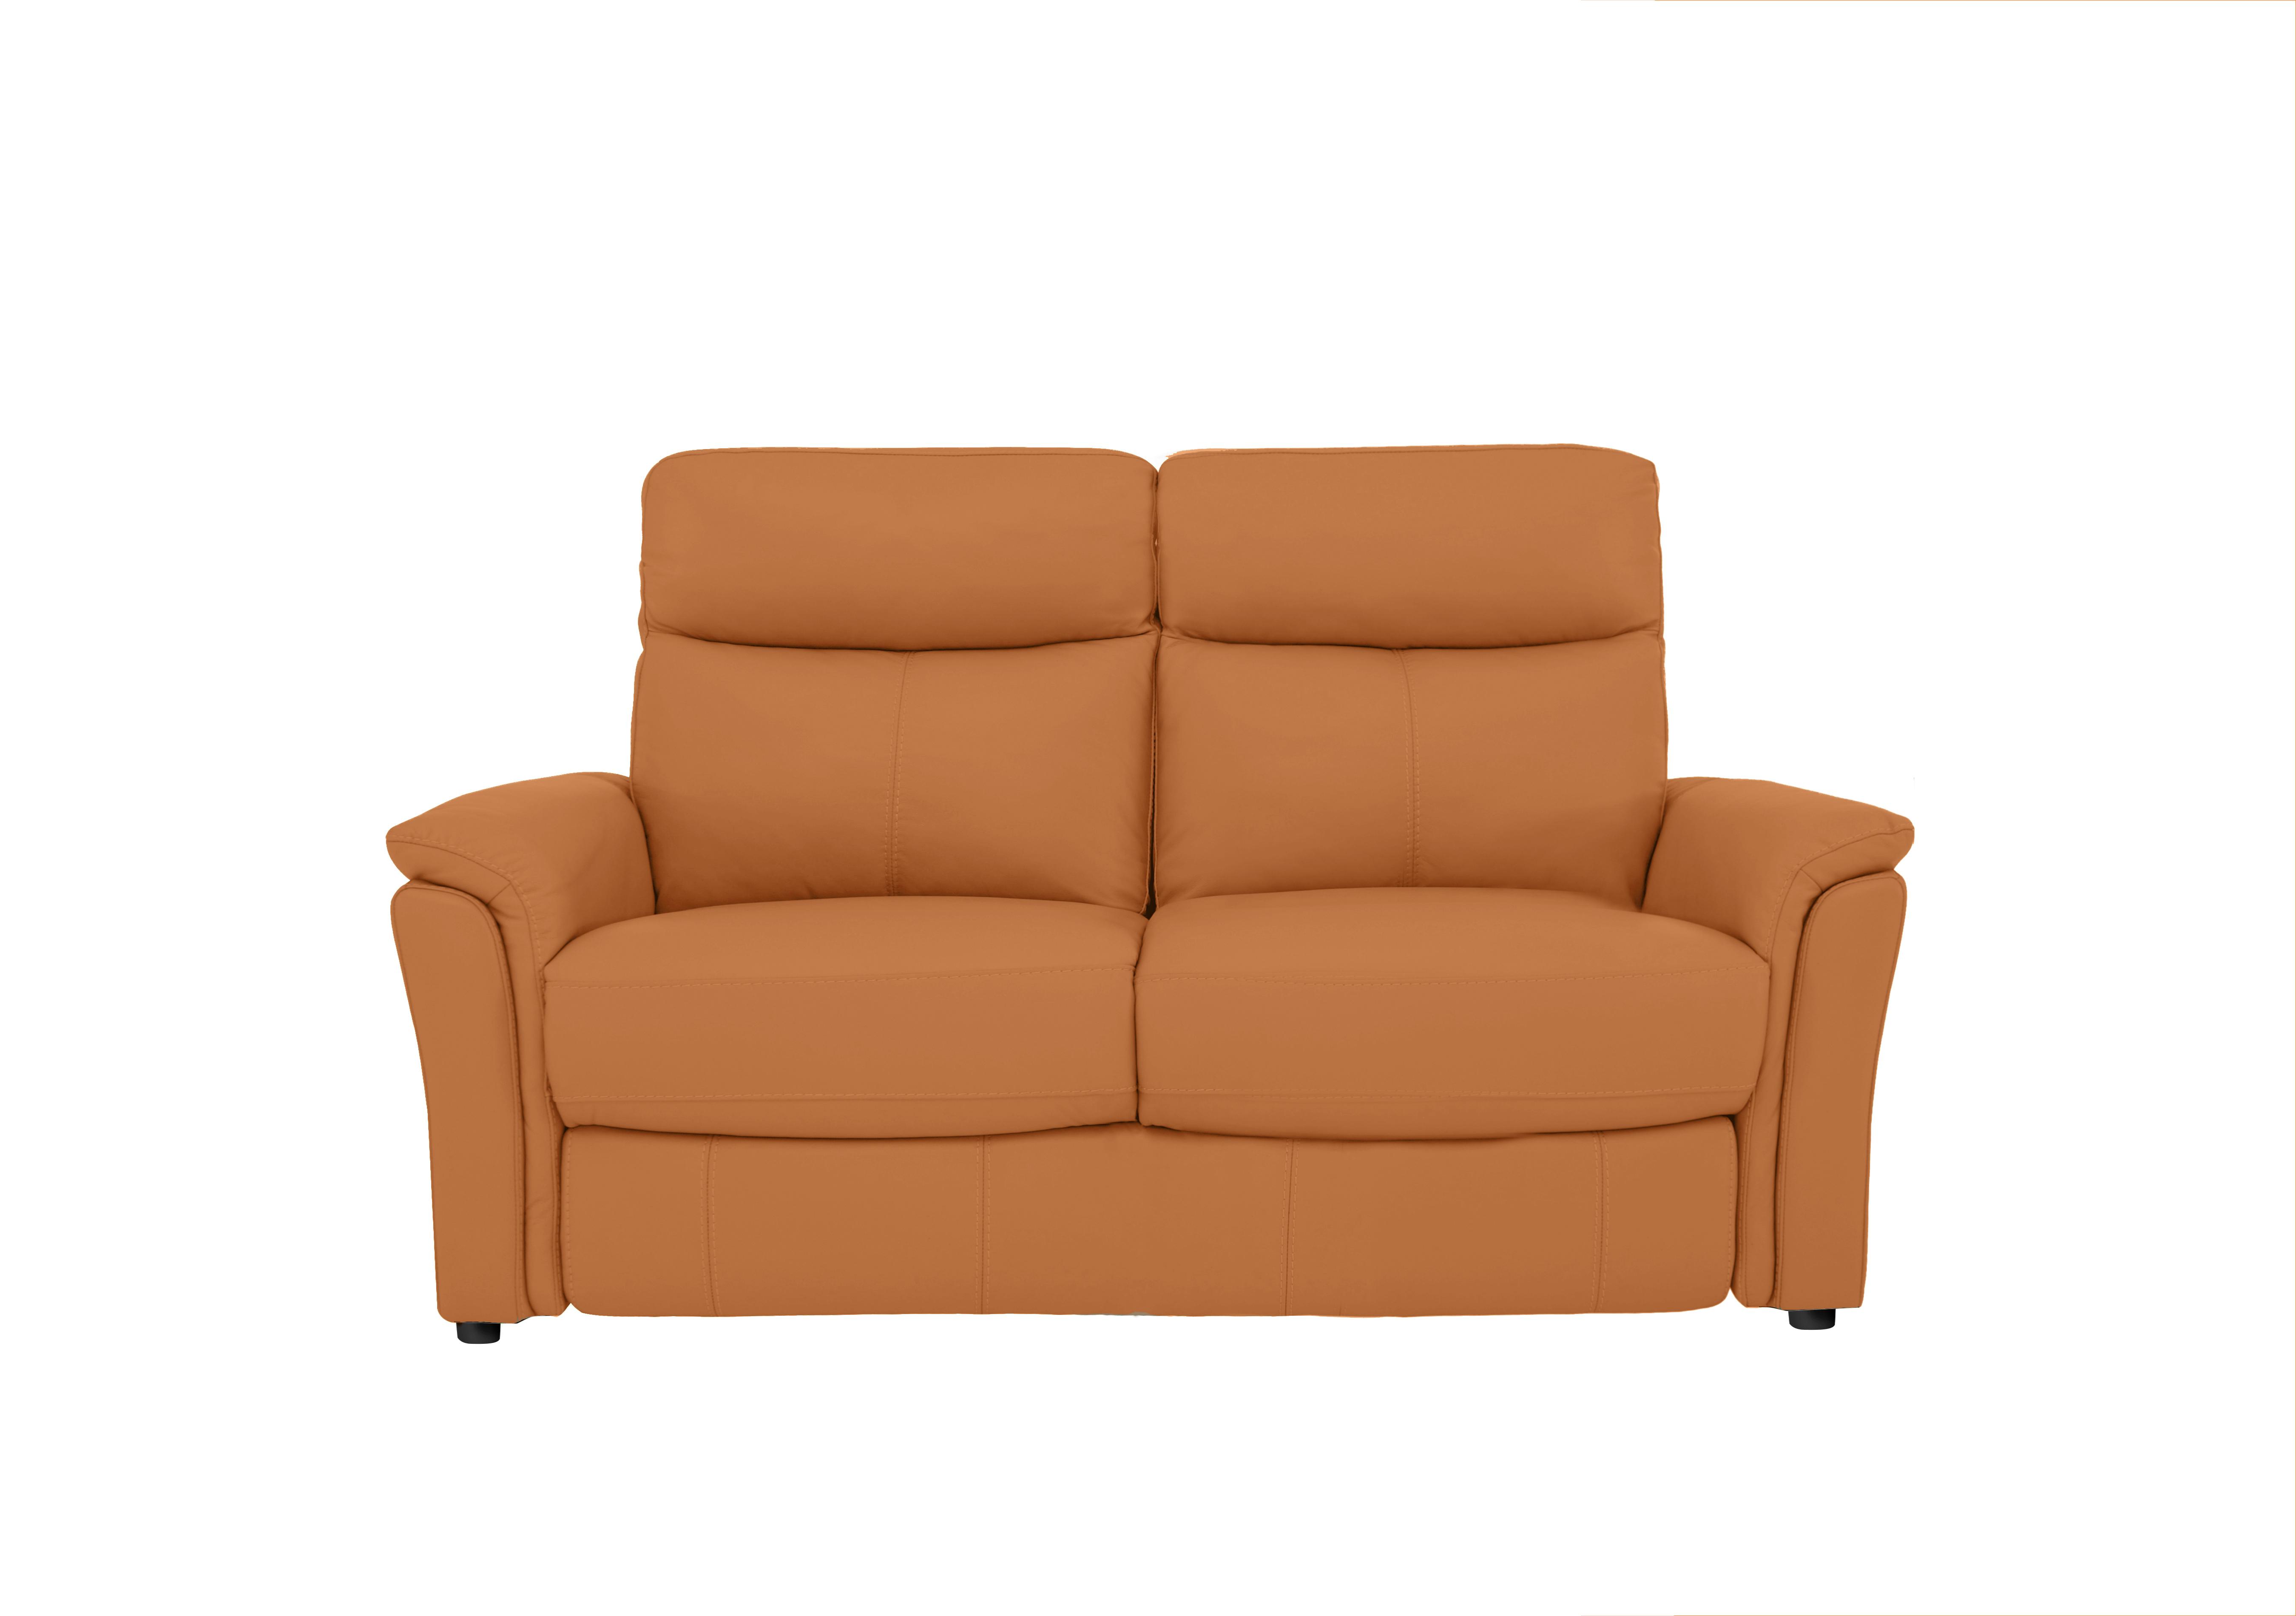 Compact Collection Piccolo 2 Seater Leather Static Sofa in Bv-335e Honey Yellow on Furniture Village